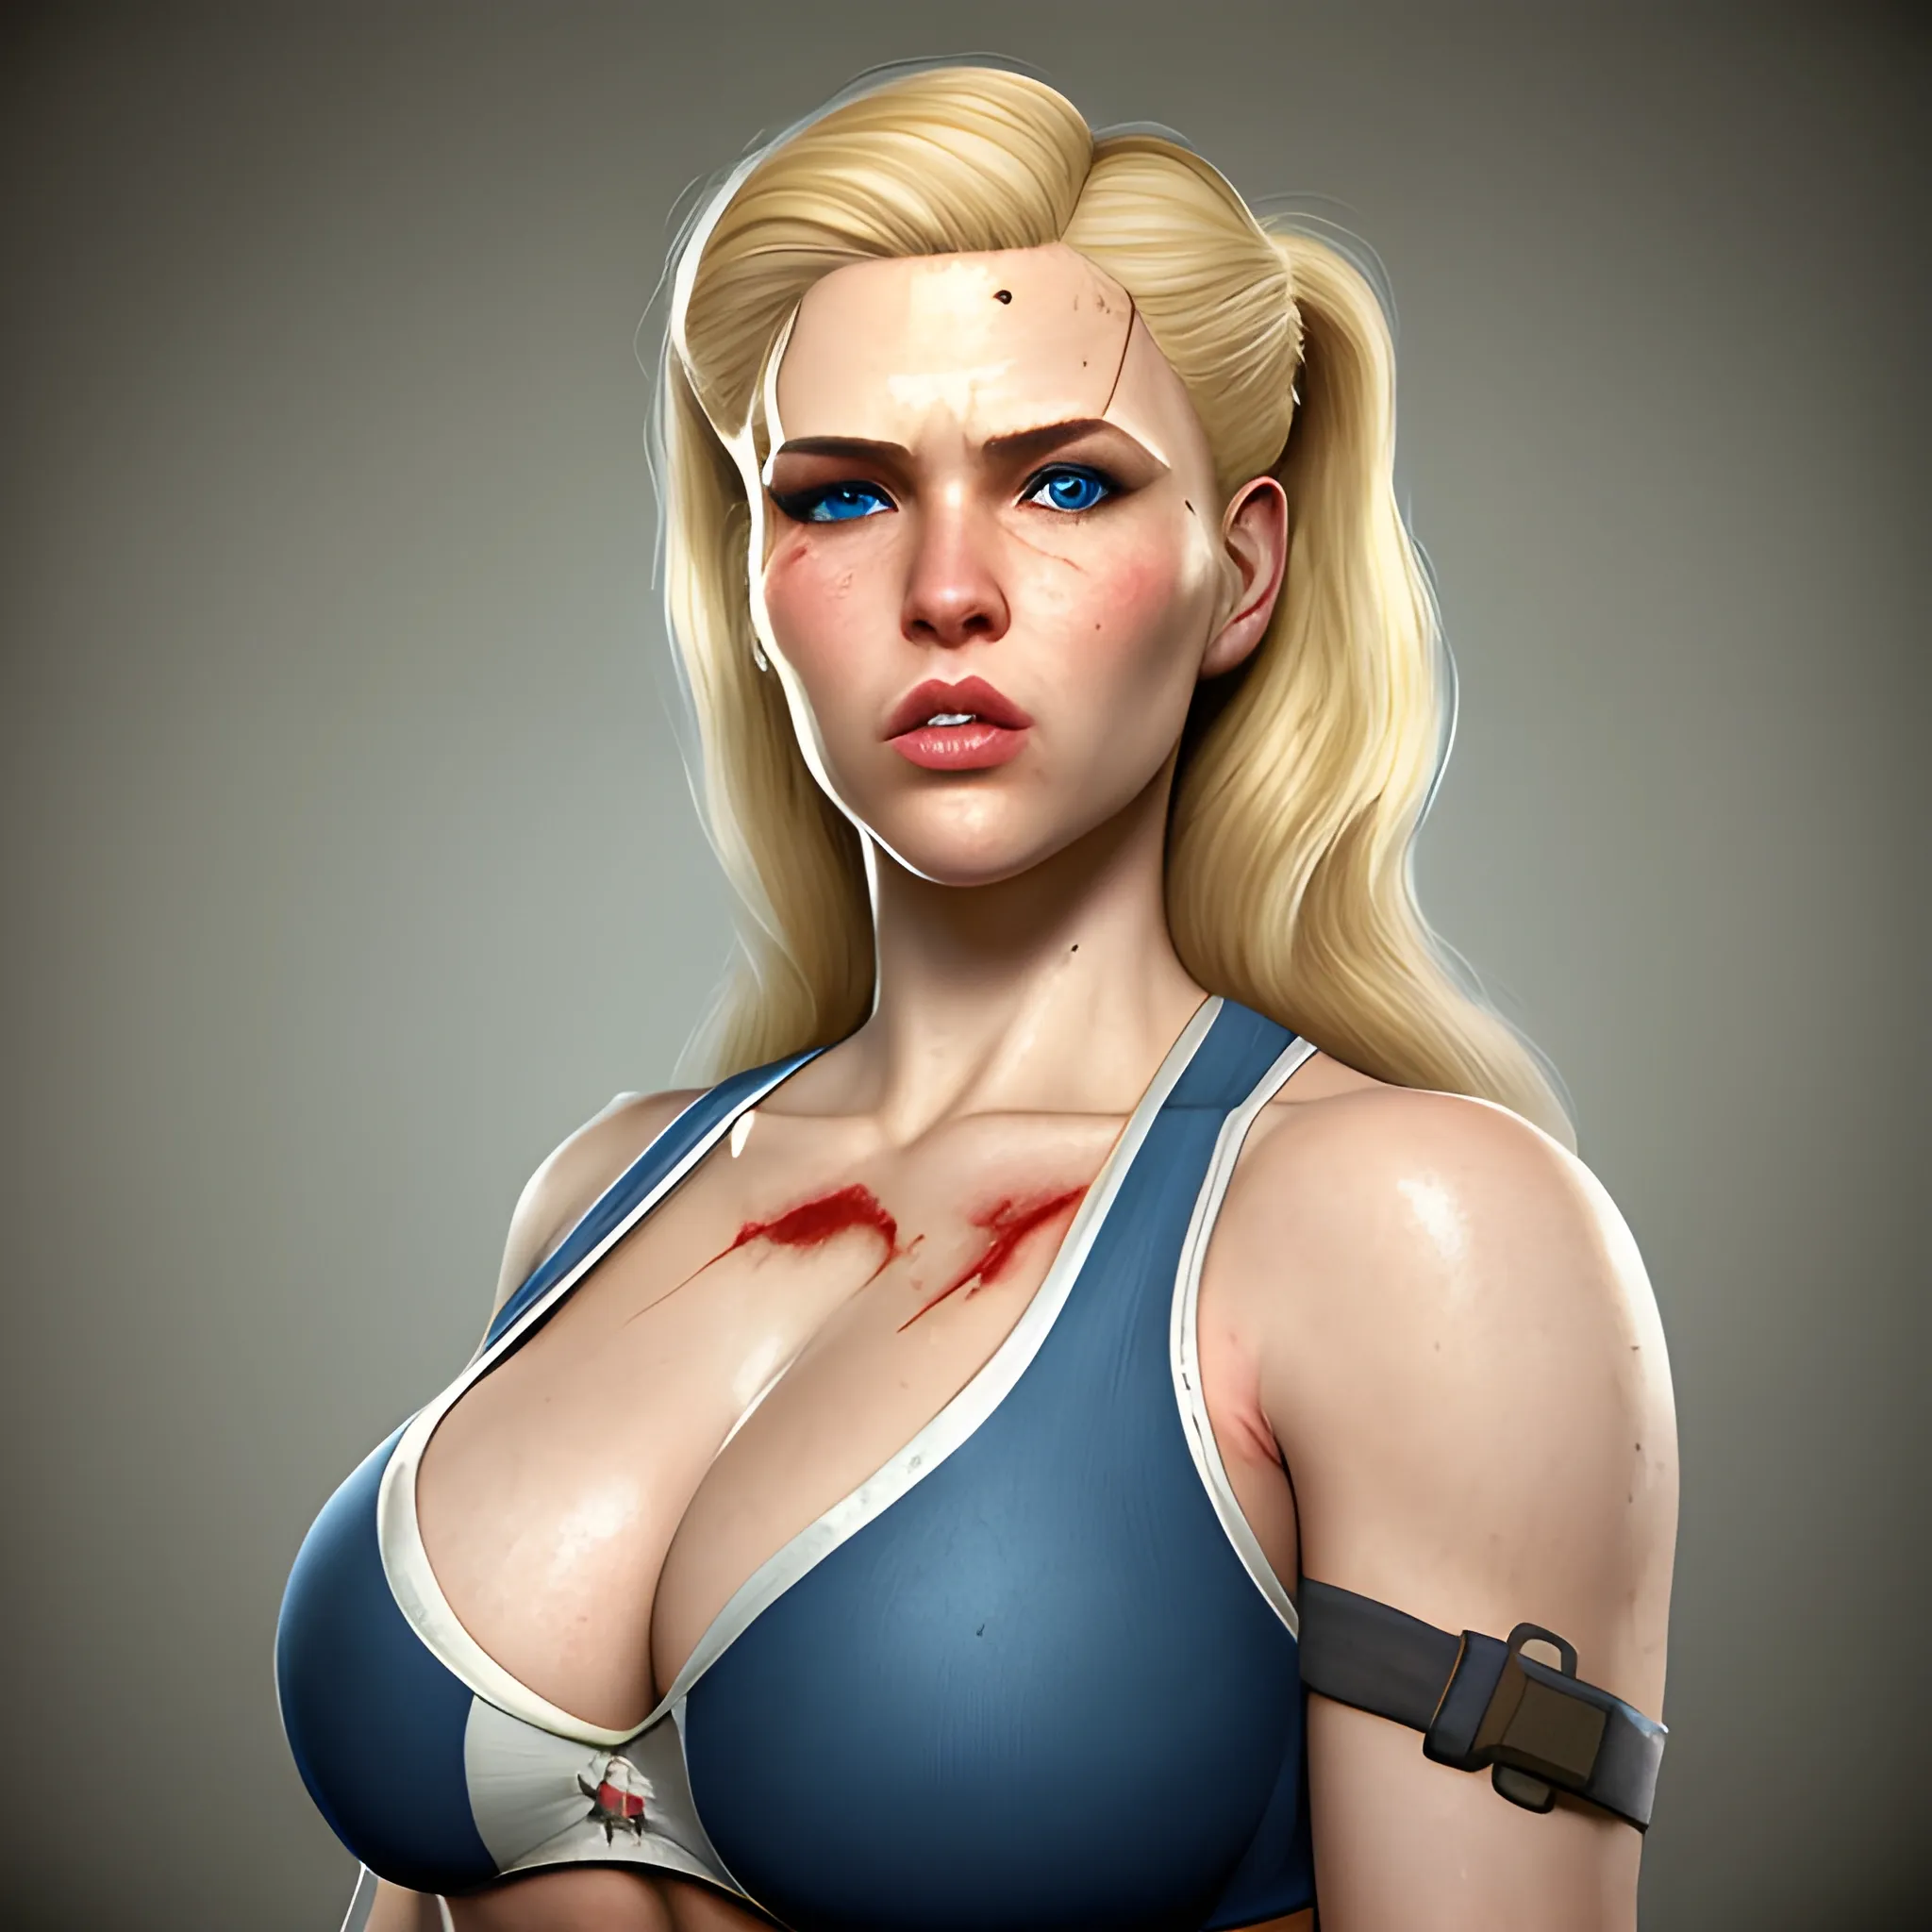 In the style of Fallout 1, (masterpiece), (portrait photography), (portrait of an adult Caucasian female), no makeup, large bosom, white sports bra, unbuttoned fallout vault dweller uniform, long blond hairstyle, blond hair, blue eyes, thin lips, pointed chin, scarred face